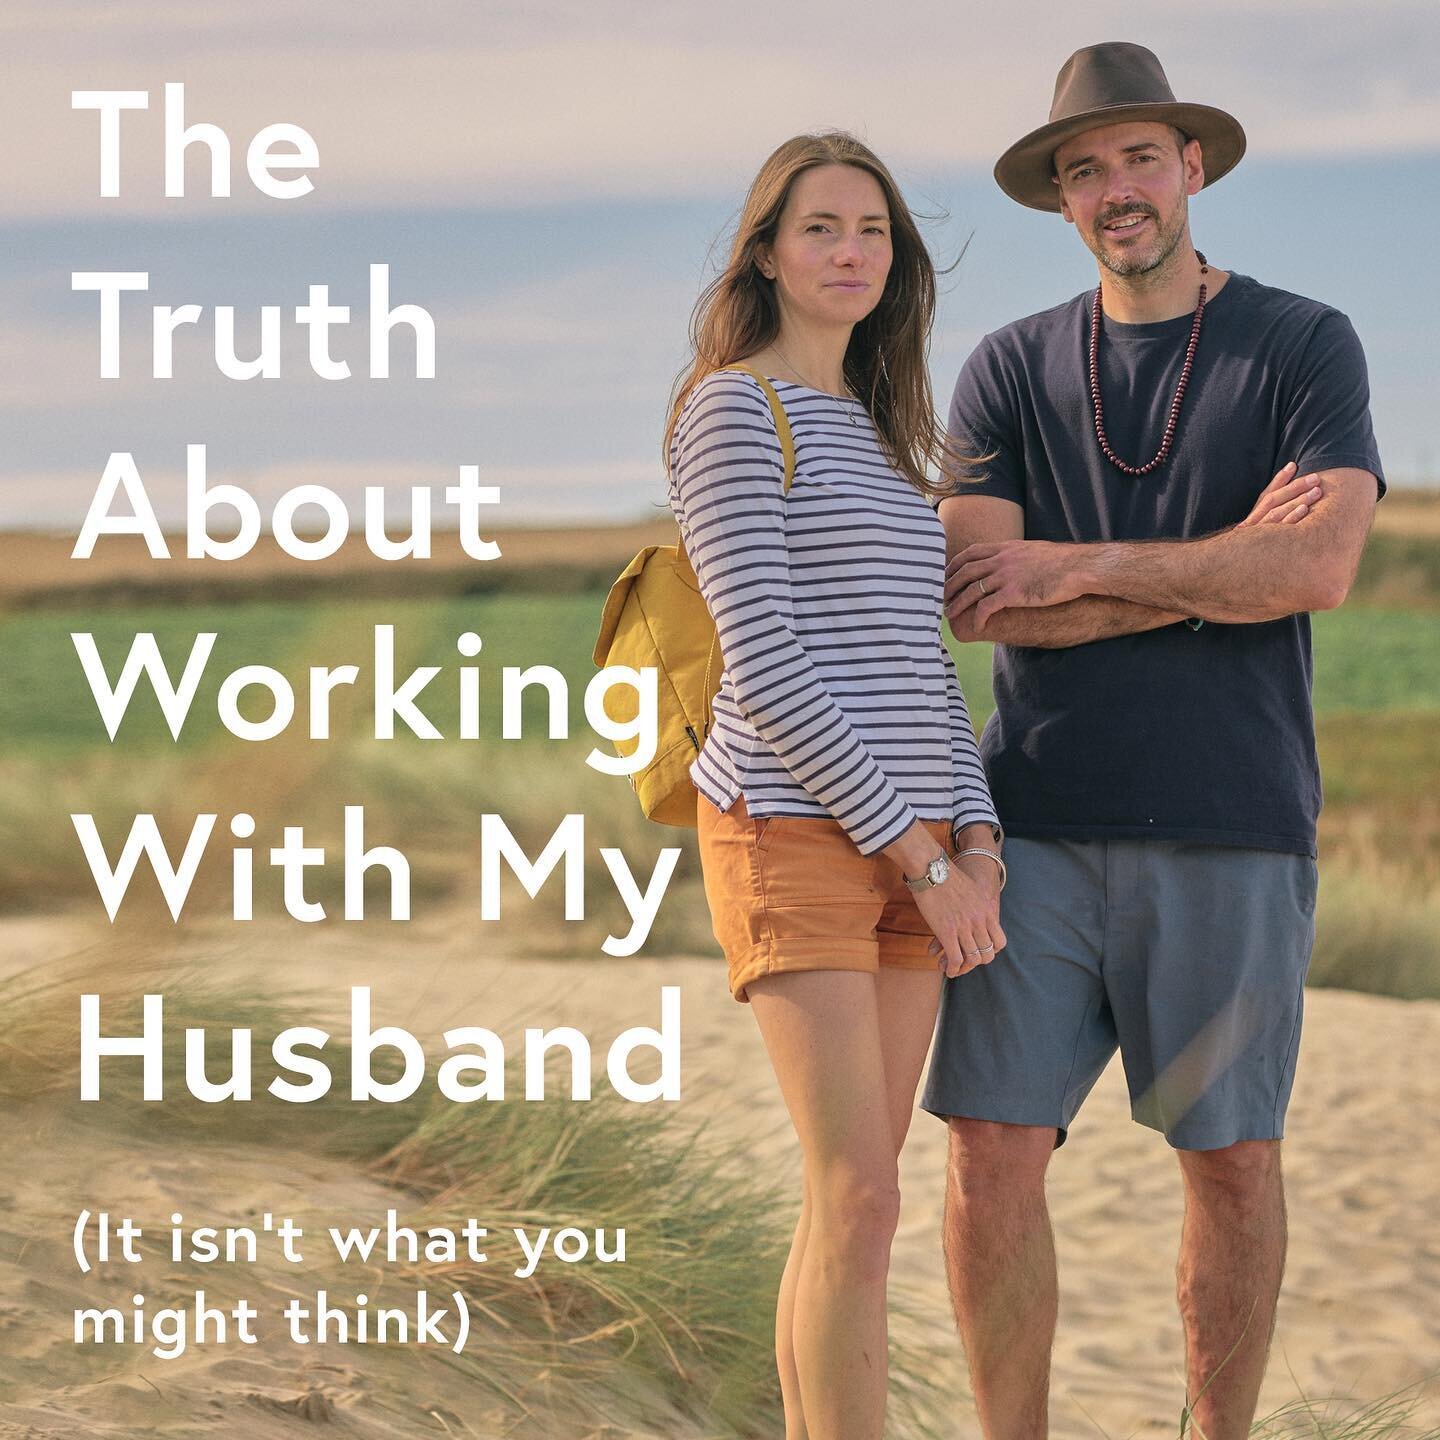 We&rsquo;ve been asked several times at events what it&rsquo;s like working together (it&rsquo;s&nbsp;the&nbsp;adults who ask this, not&nbsp;the&nbsp;kids).

But&nbsp;the&nbsp;truth isn&rsquo;t what you might think&hellip;

I write our books and Jame